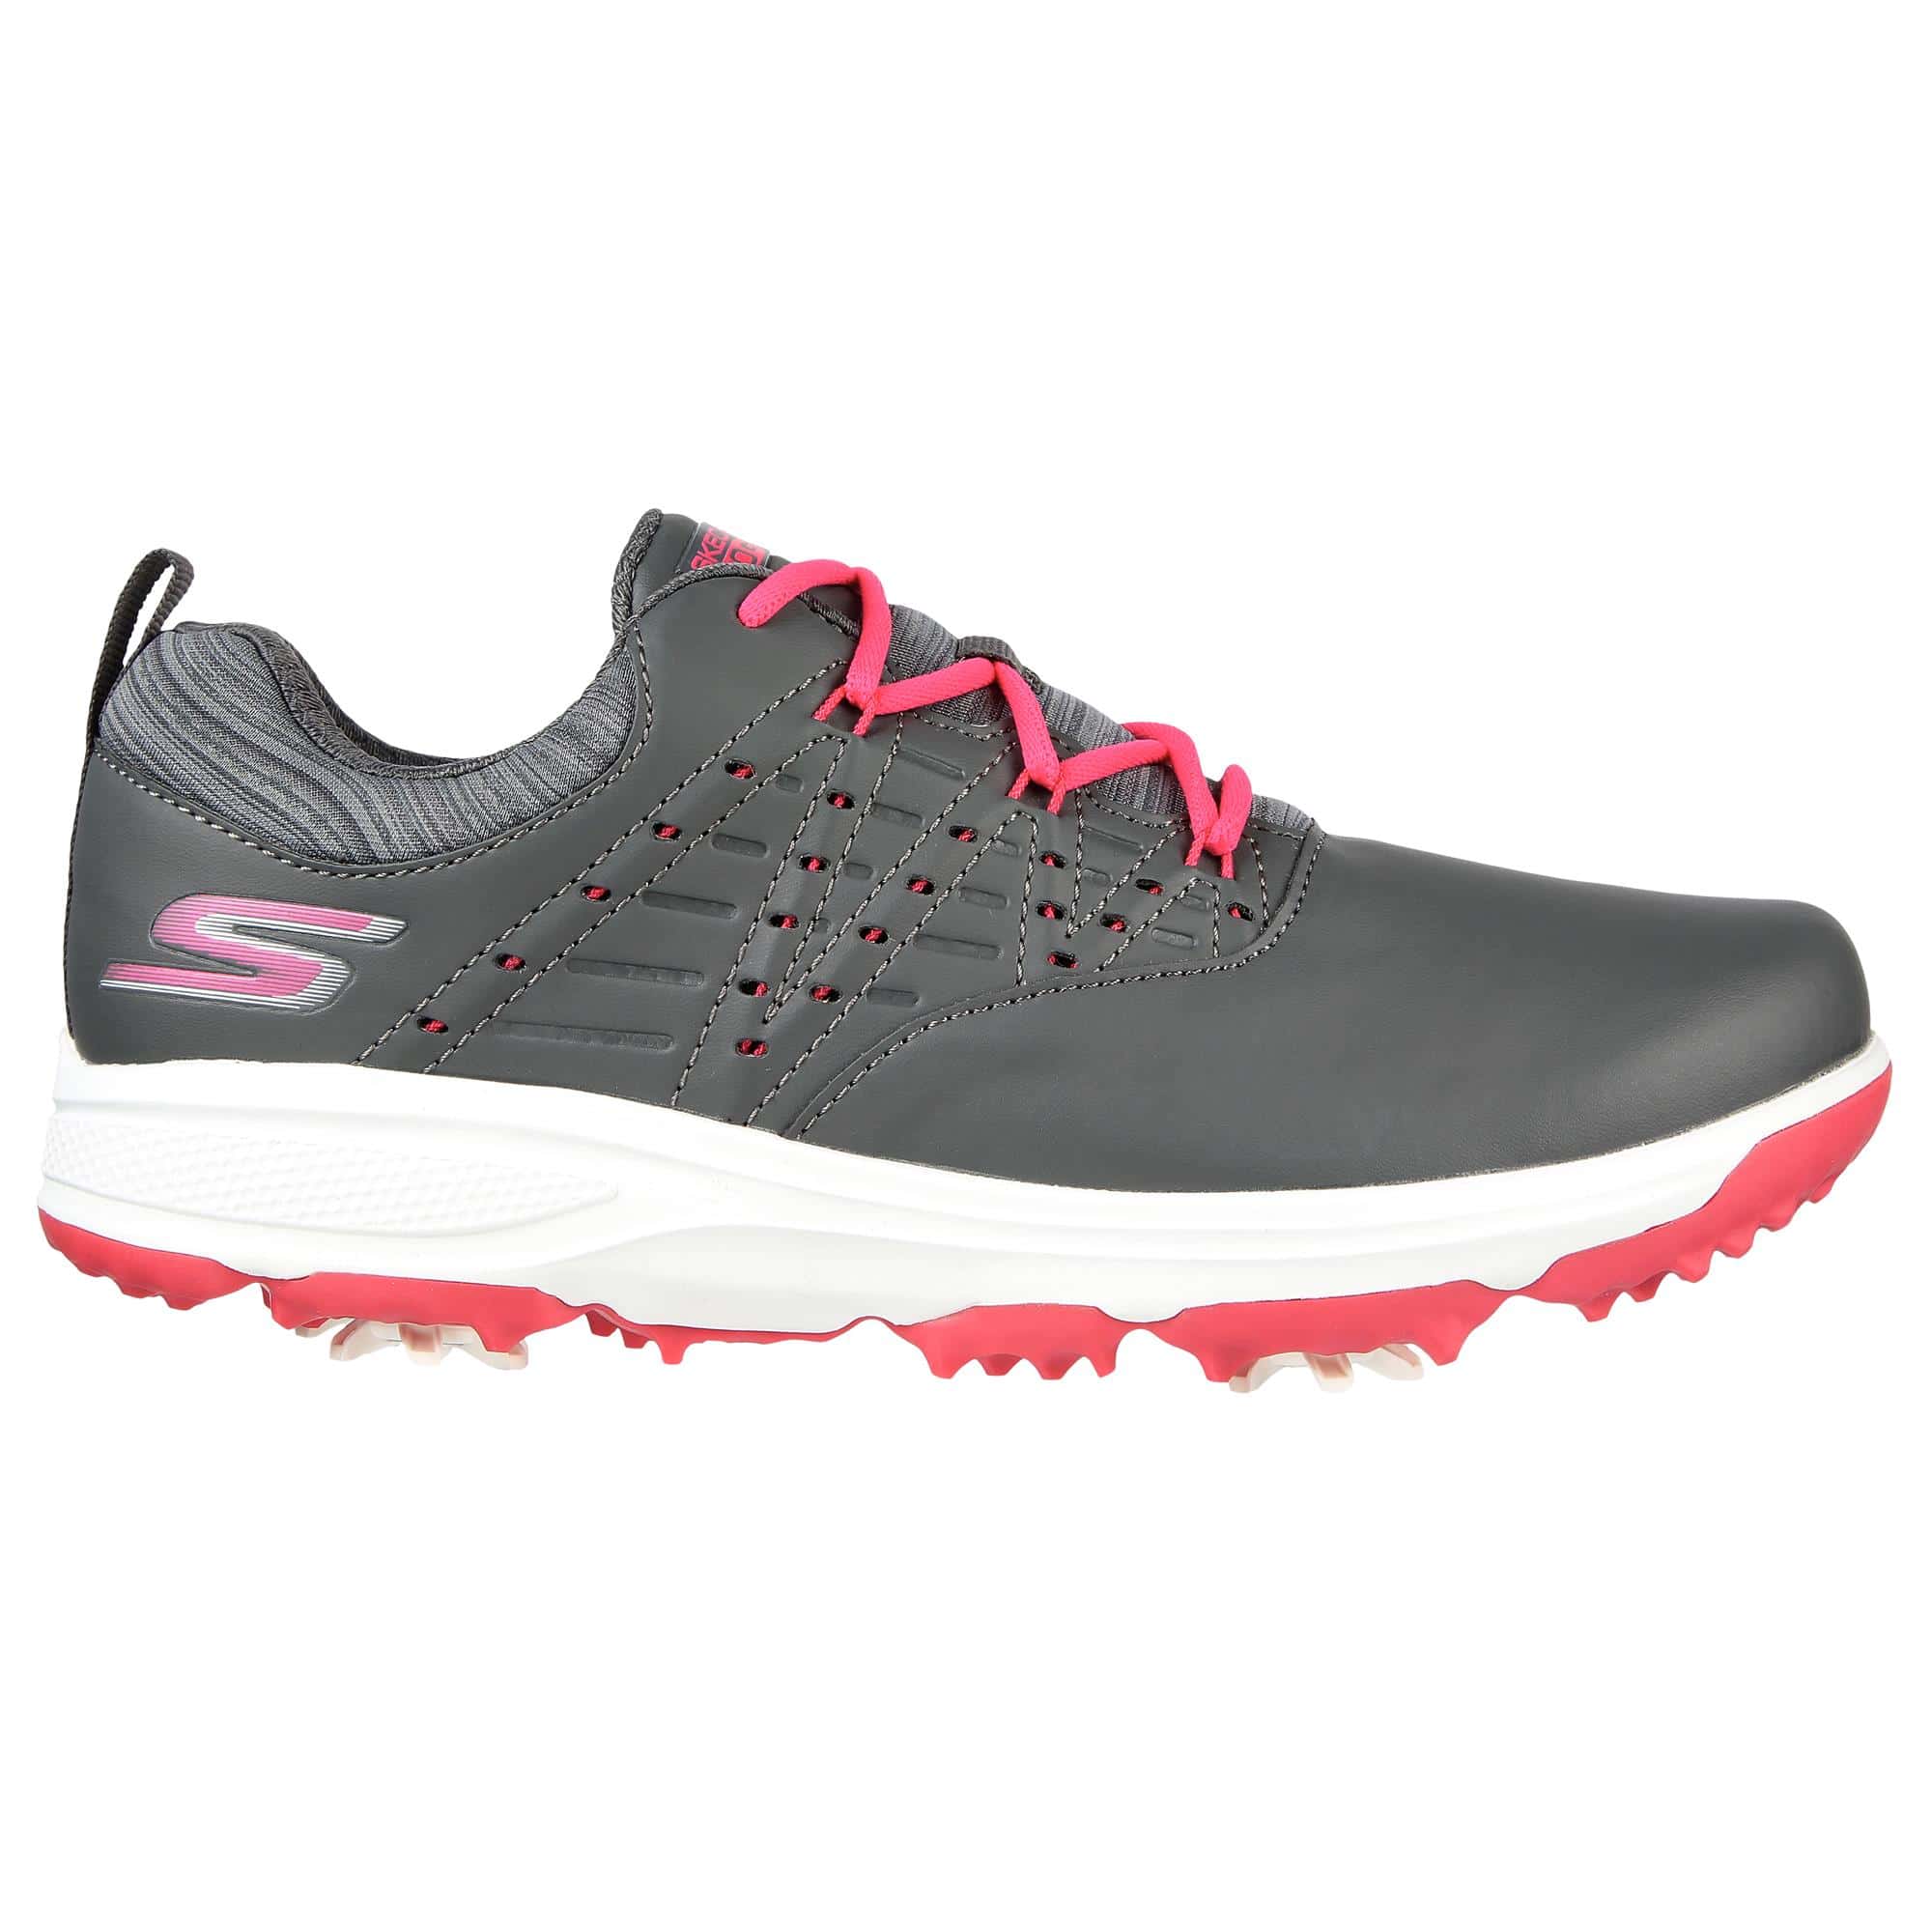 Skechers Go Golf Pro 2 Ladies Golf Shoes Charcoal/Pink